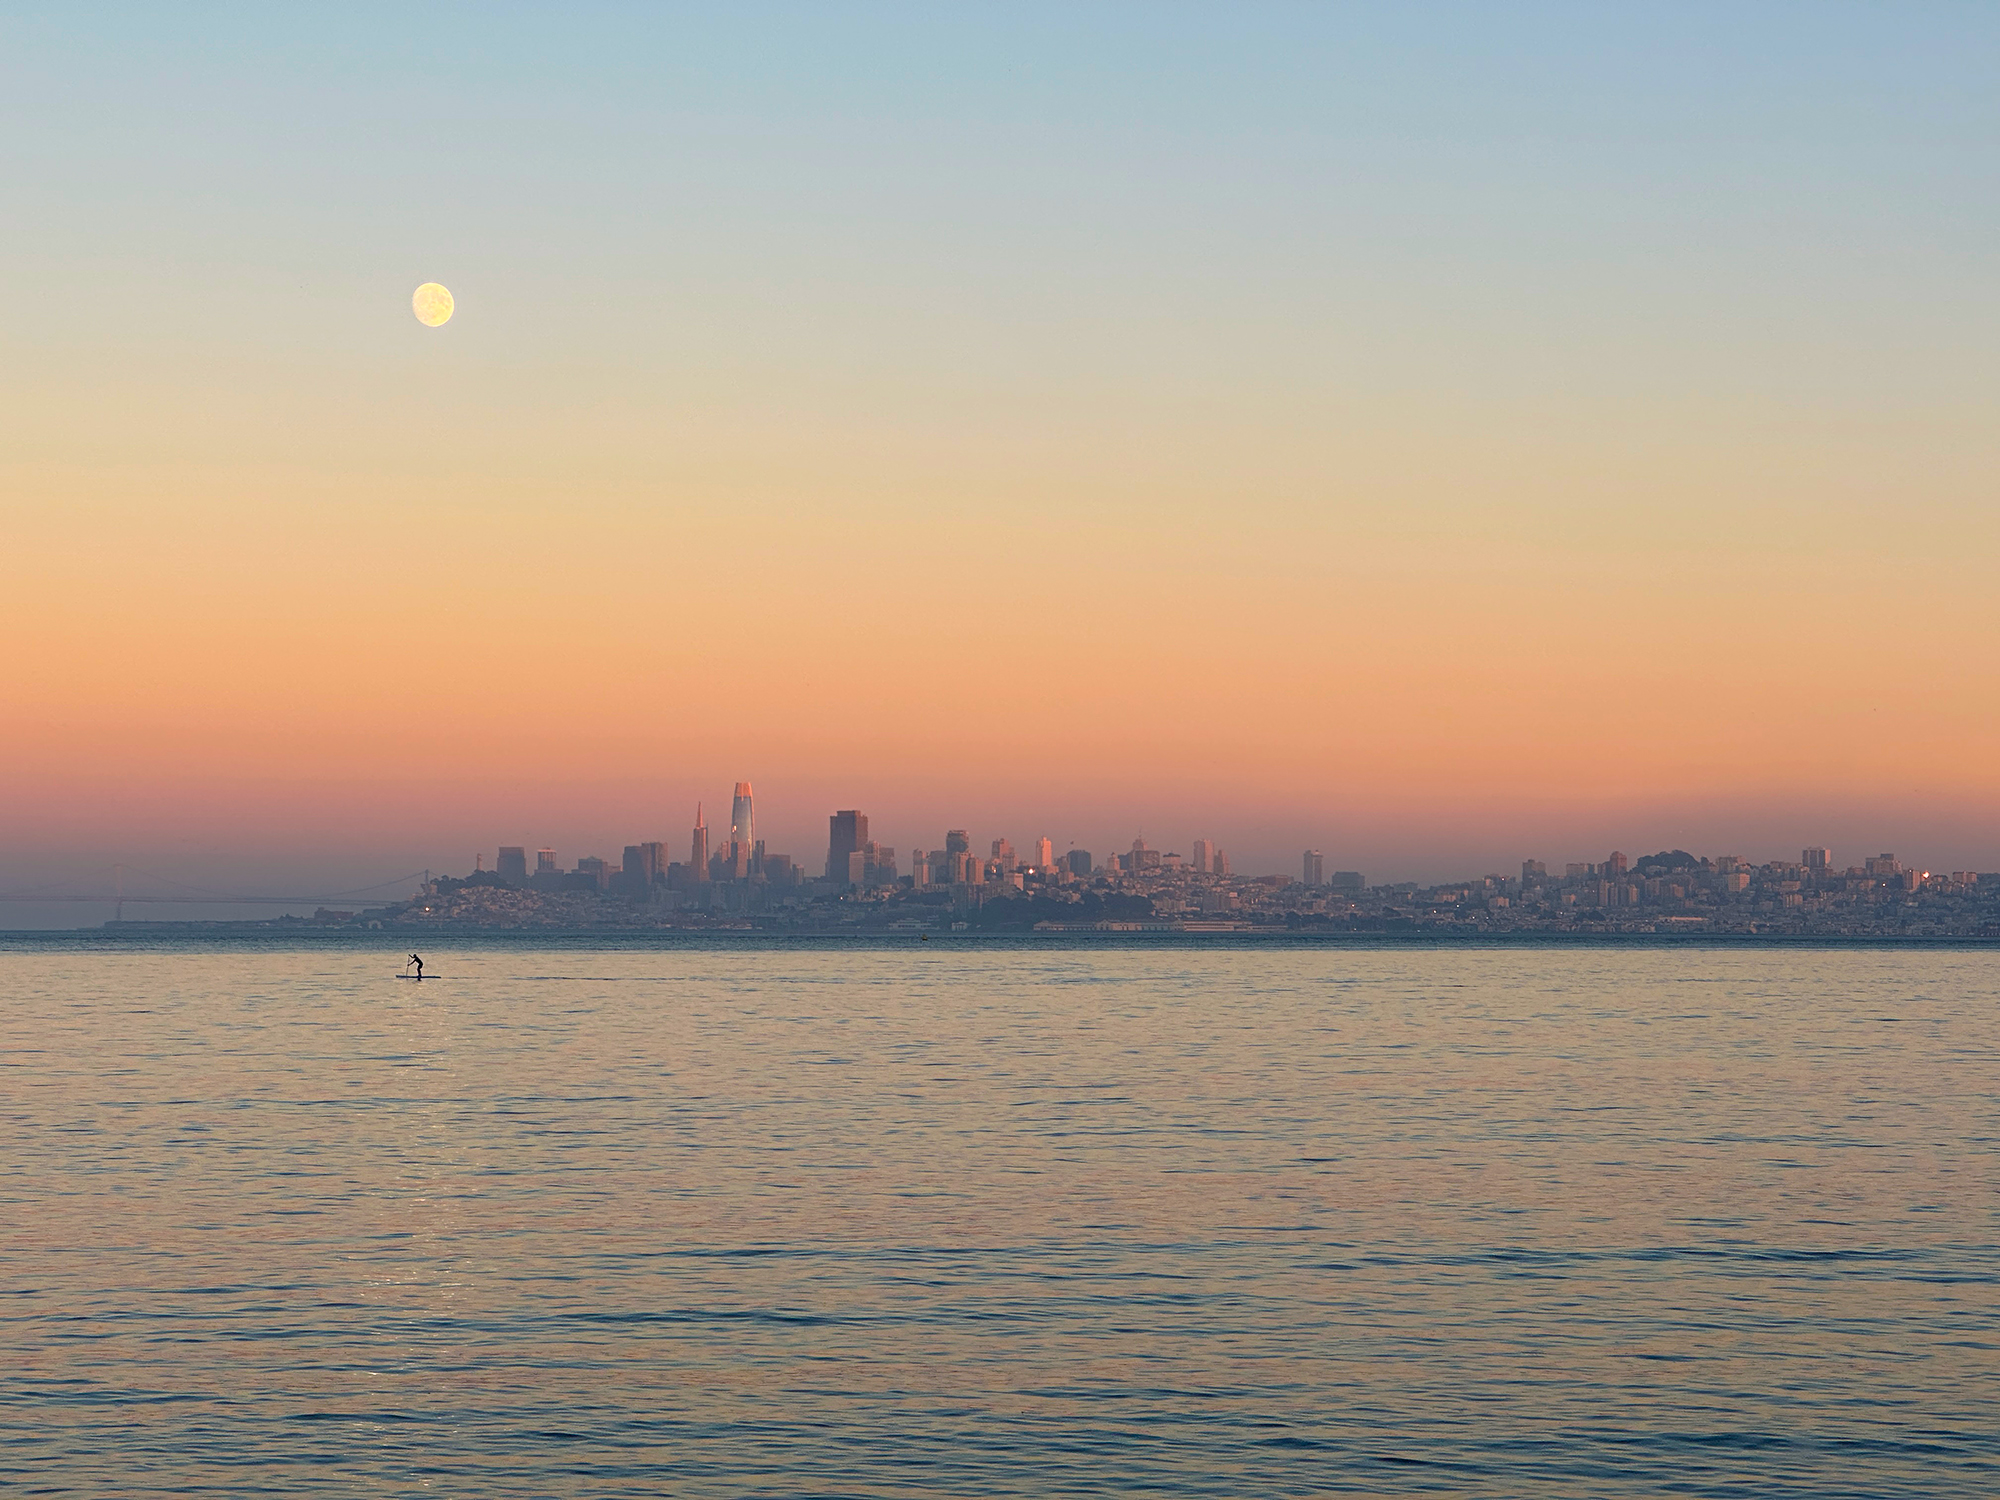 Moon rising over the San Francisco skyline, with the sky a rainbow color at sunset.